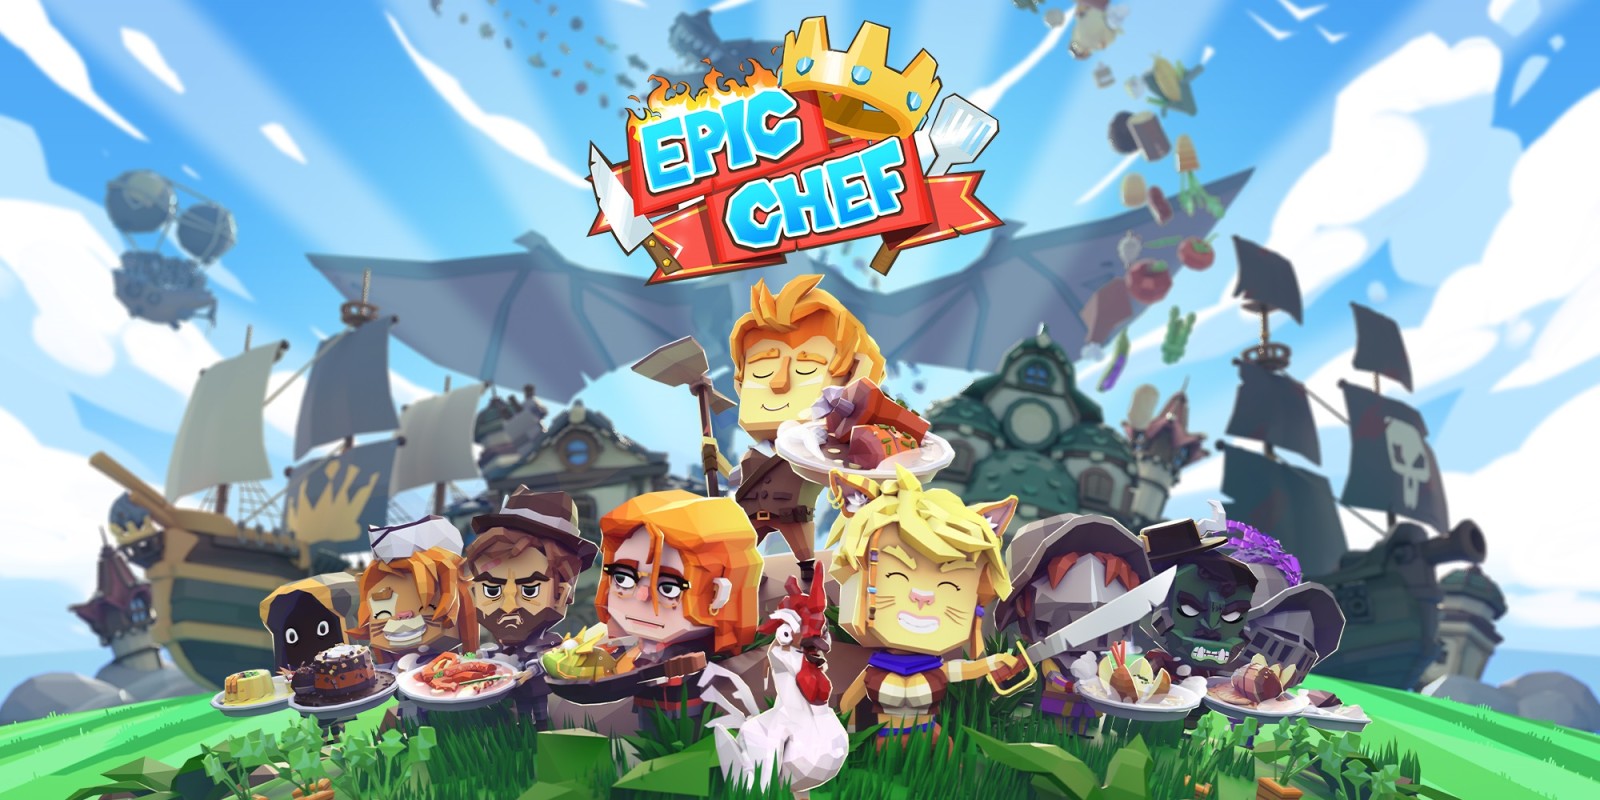 You are currently viewing Играем в новинку Epic Chef от Team17